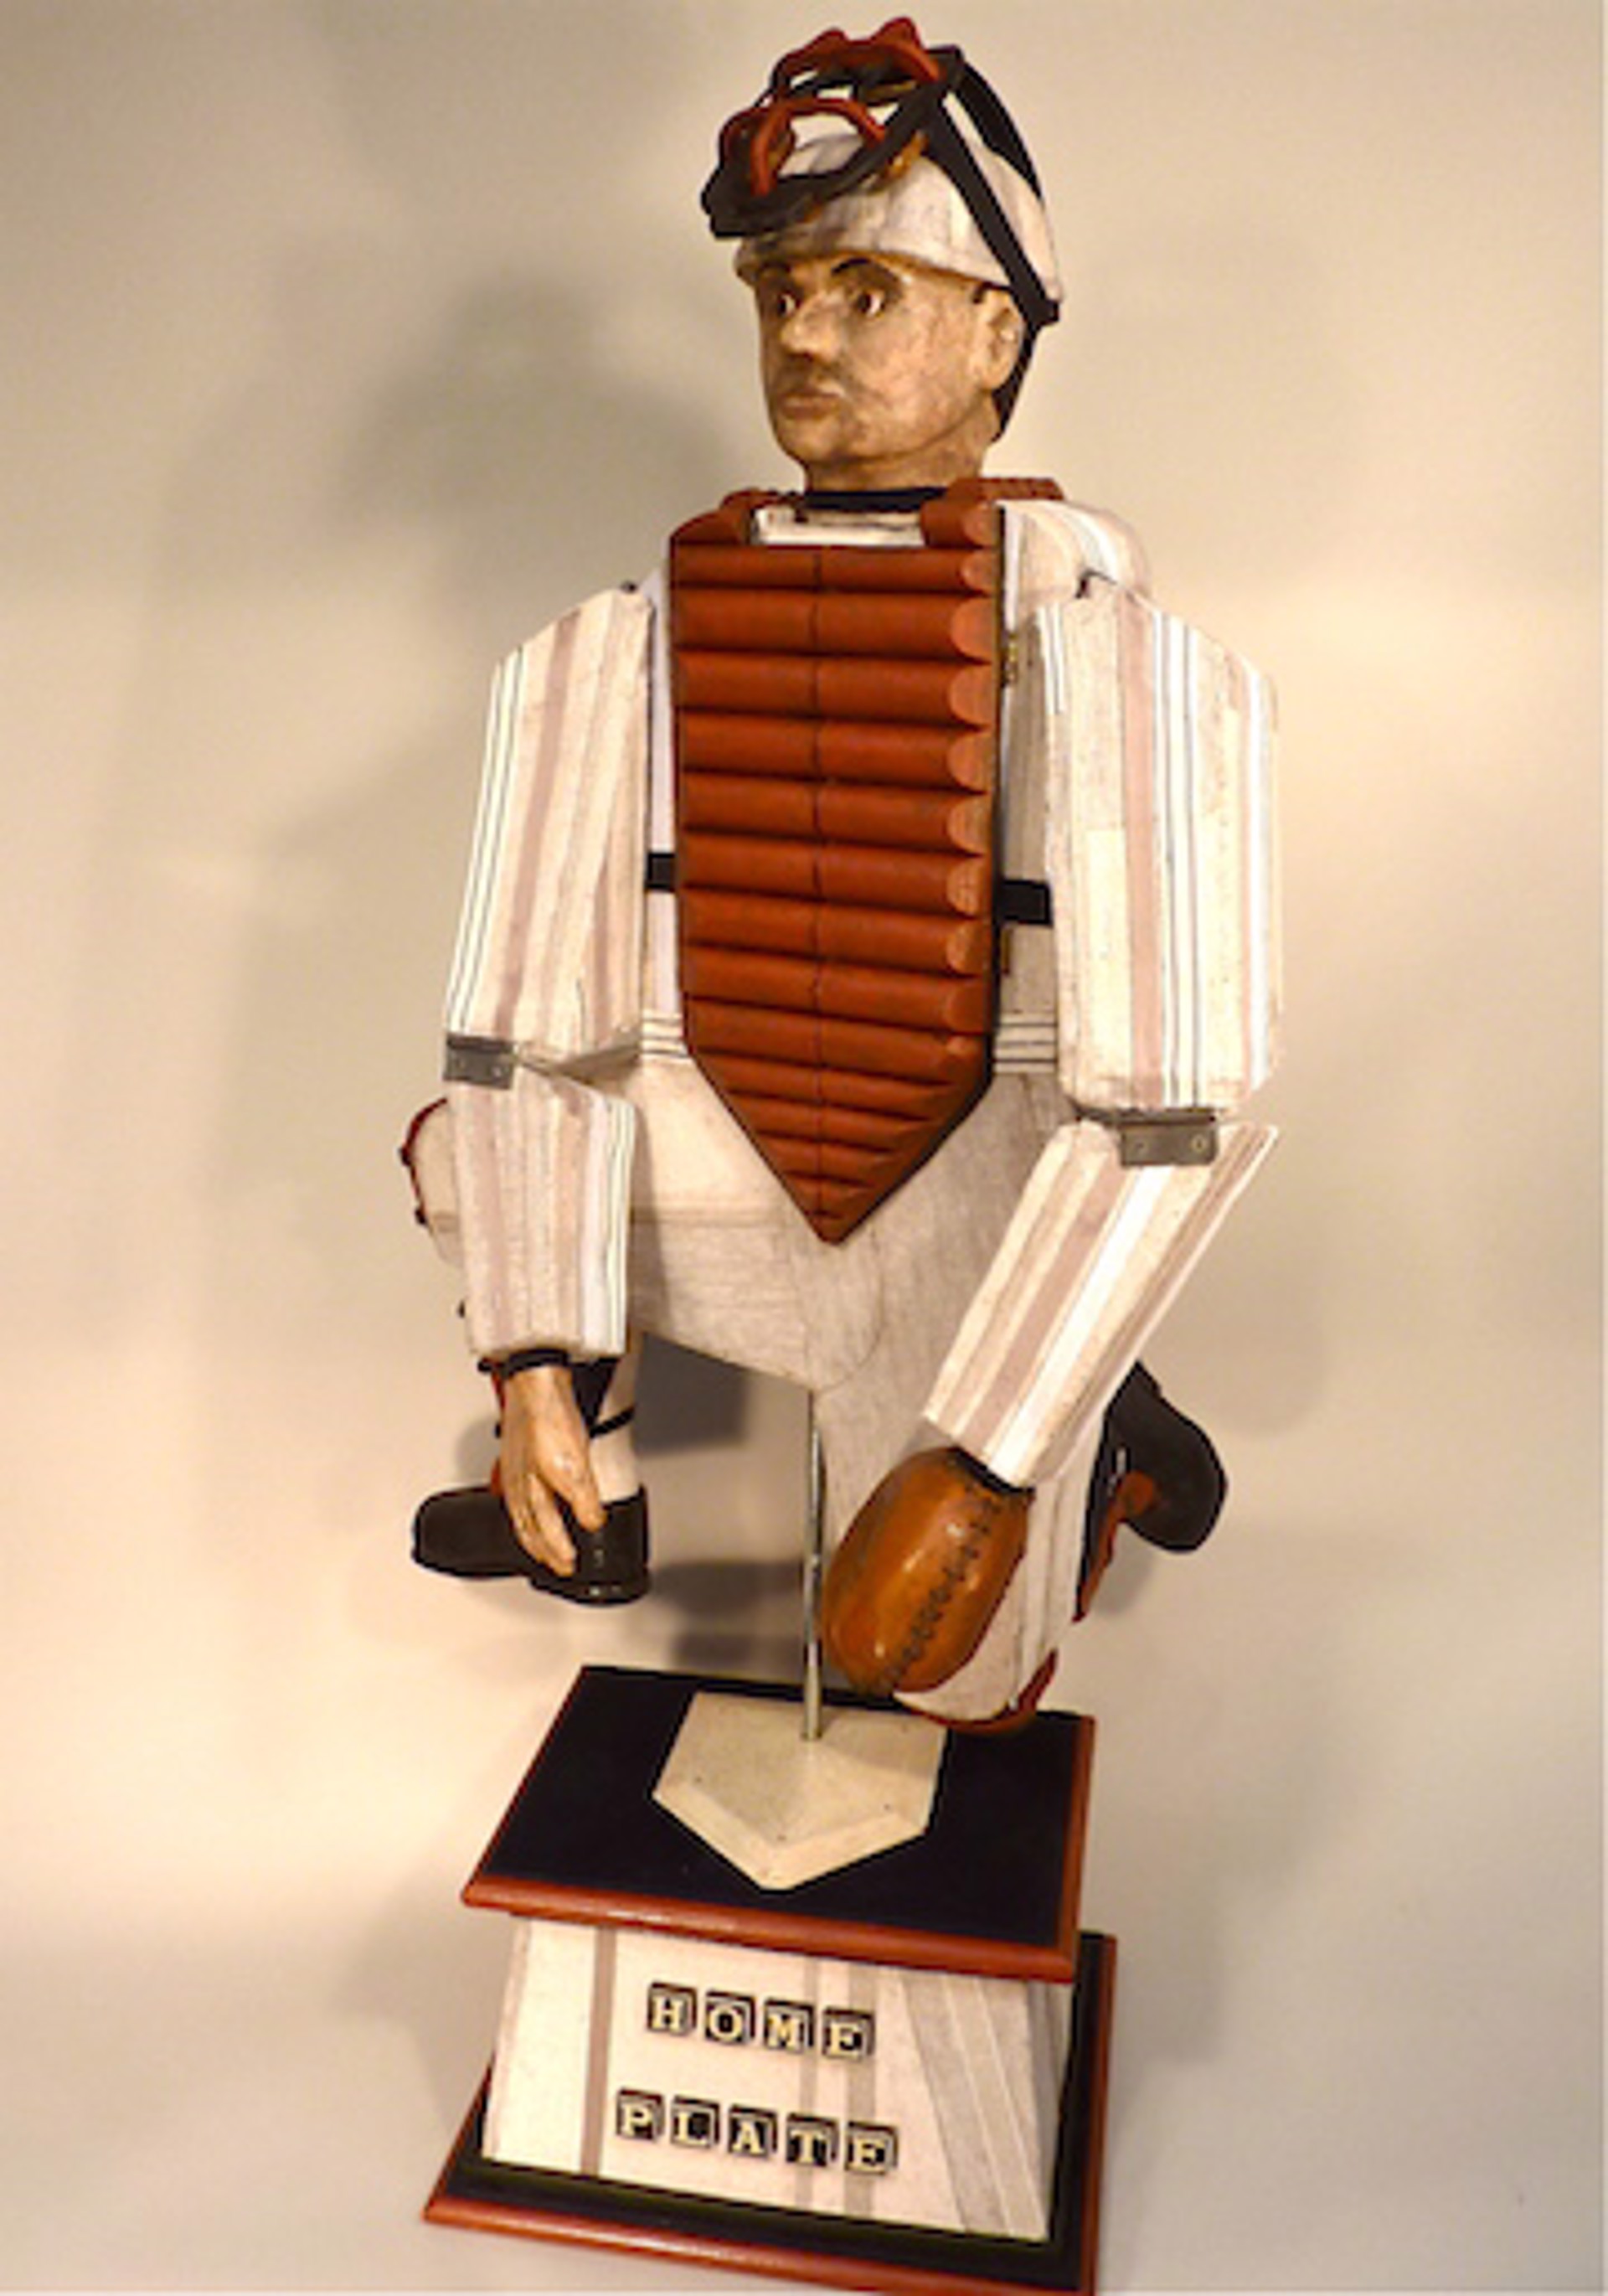 HOMEPLATE CATCHER by HARVEY PETERSON